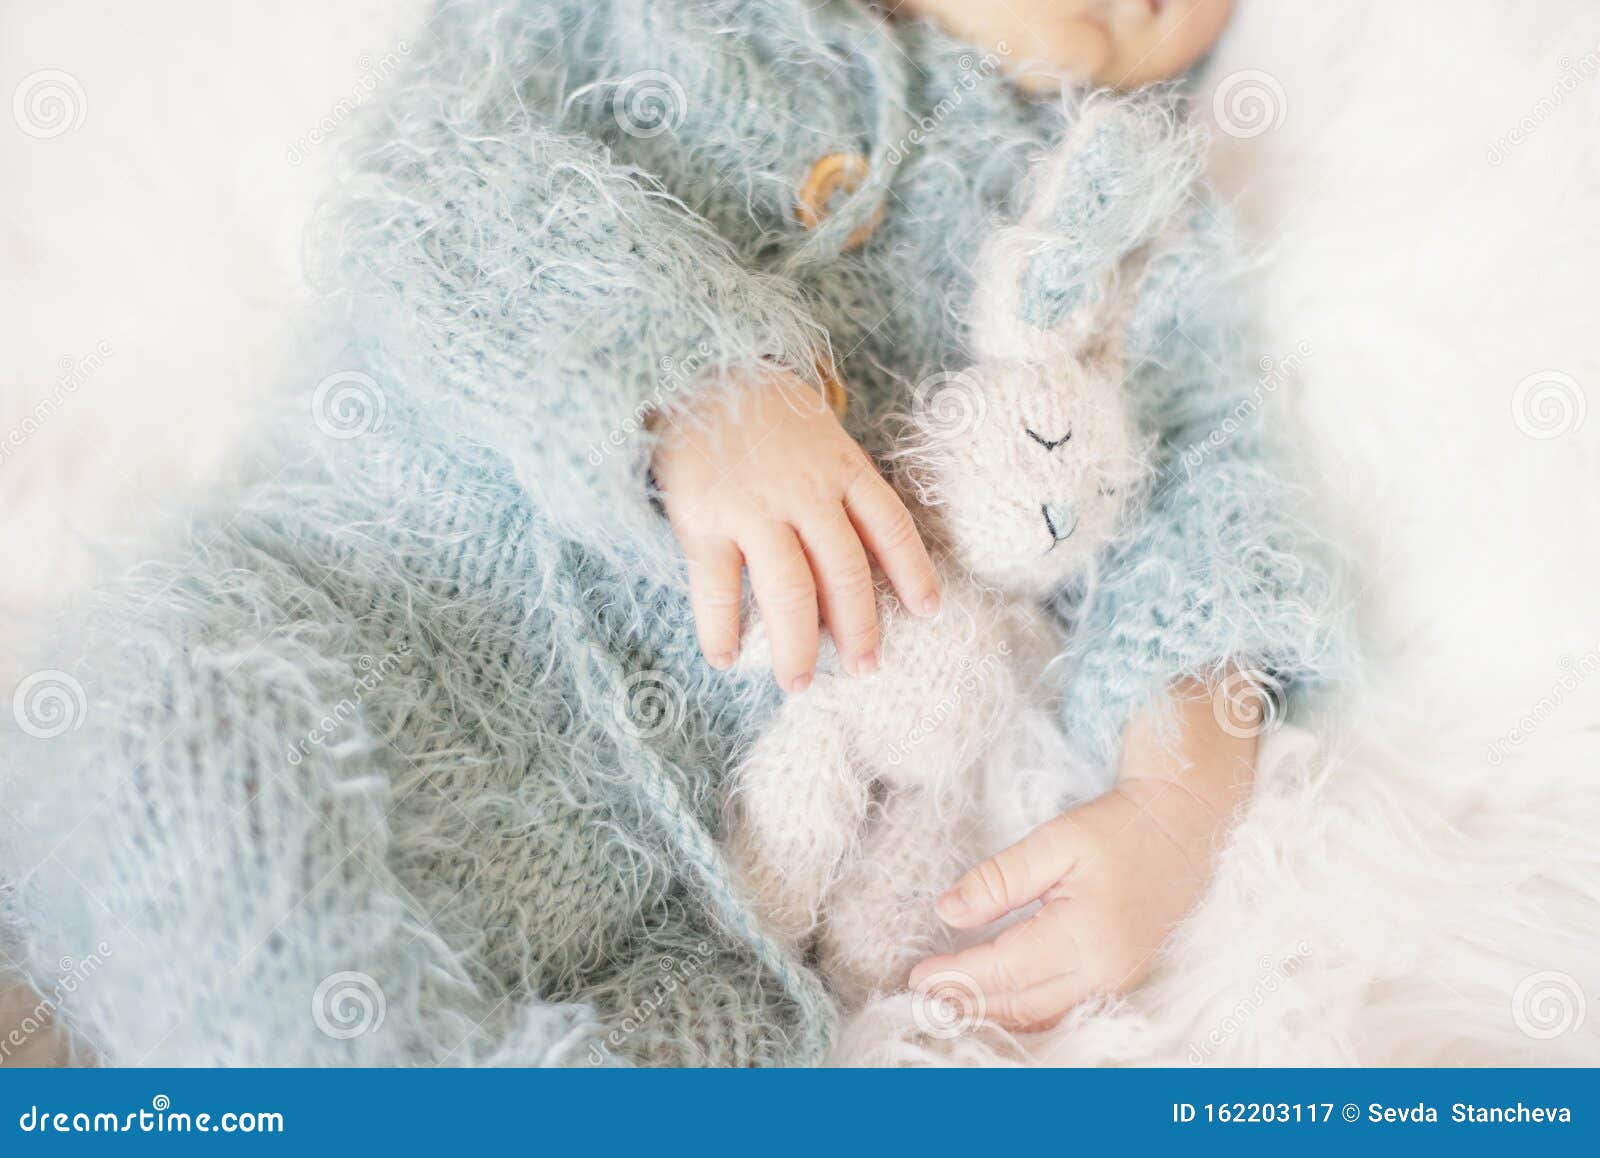 newborn baby. sleeping baby in bed, holding a bunny toy. baby with blue knitted romper